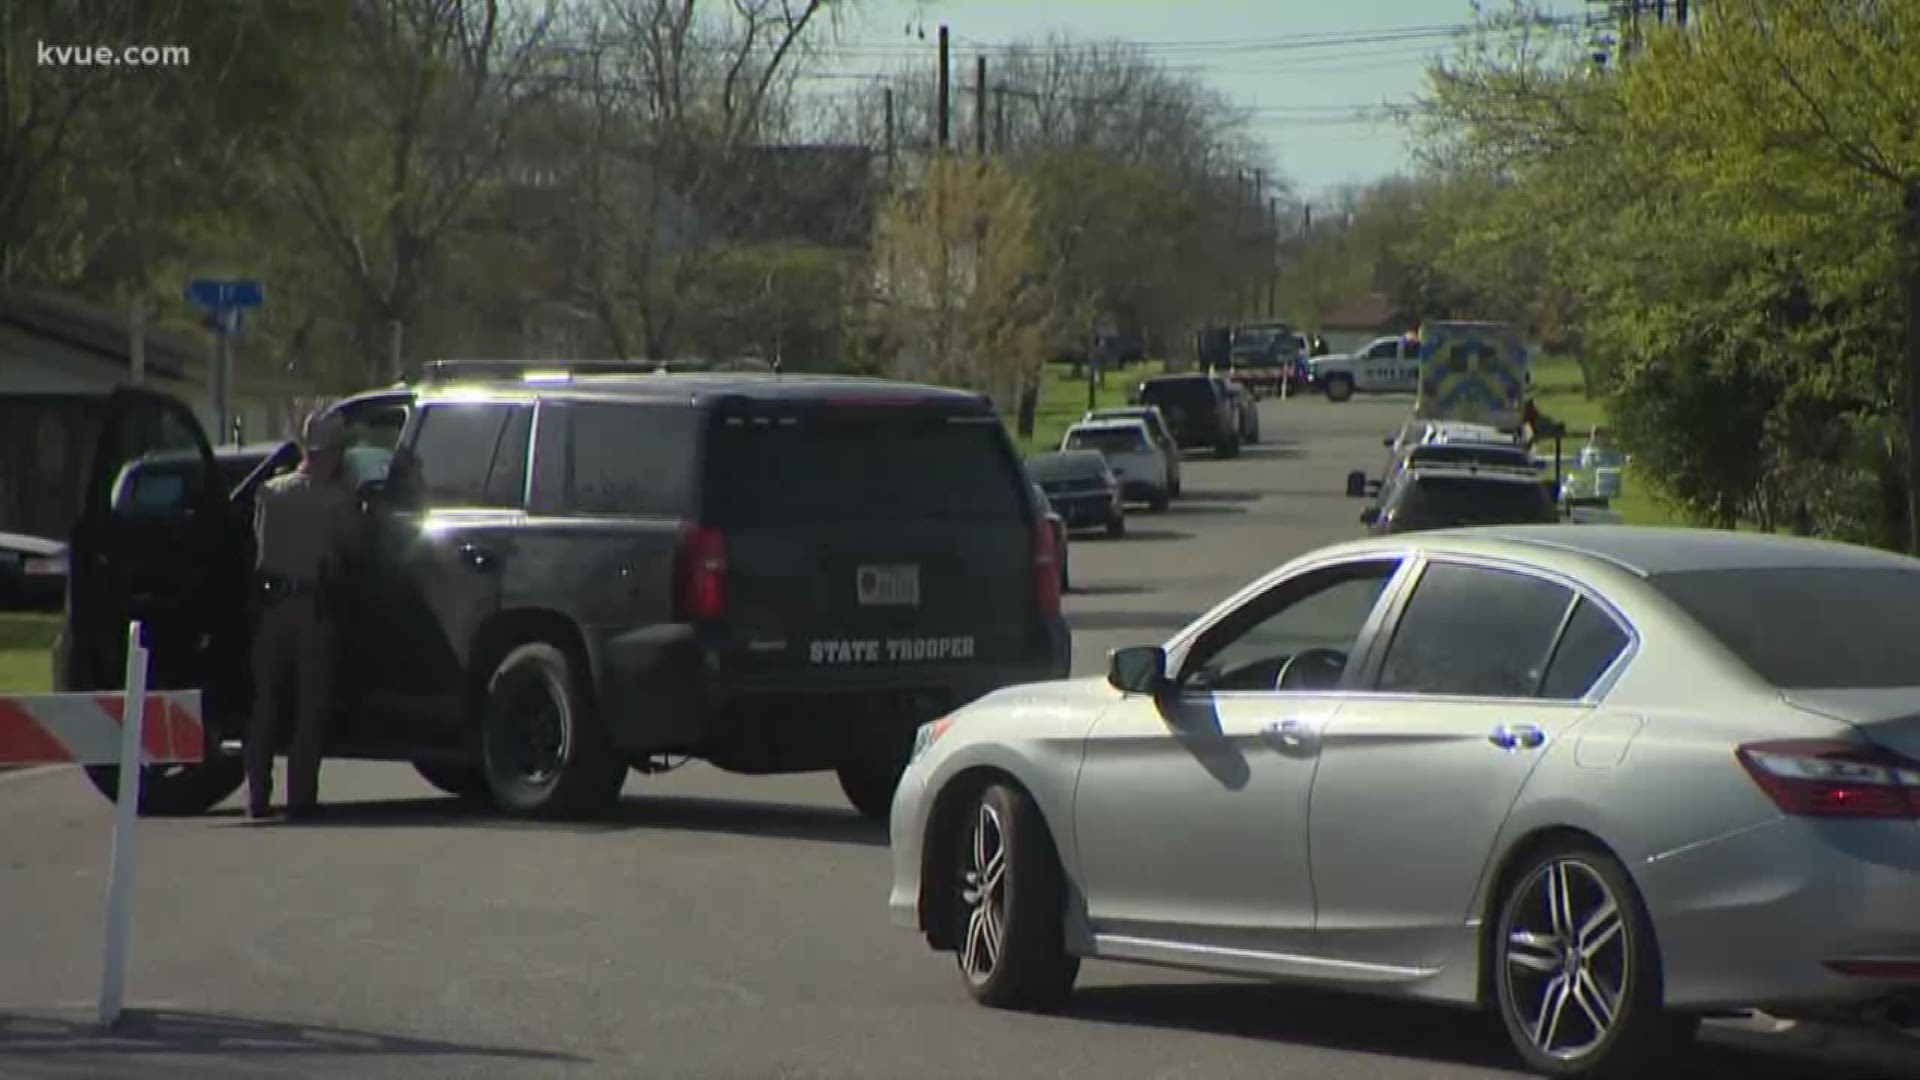 Authorities have blocked off a perimeter around the suspected Austin bomber's home as they continue to search for a motive and investigate whether anyone else may have been involved.